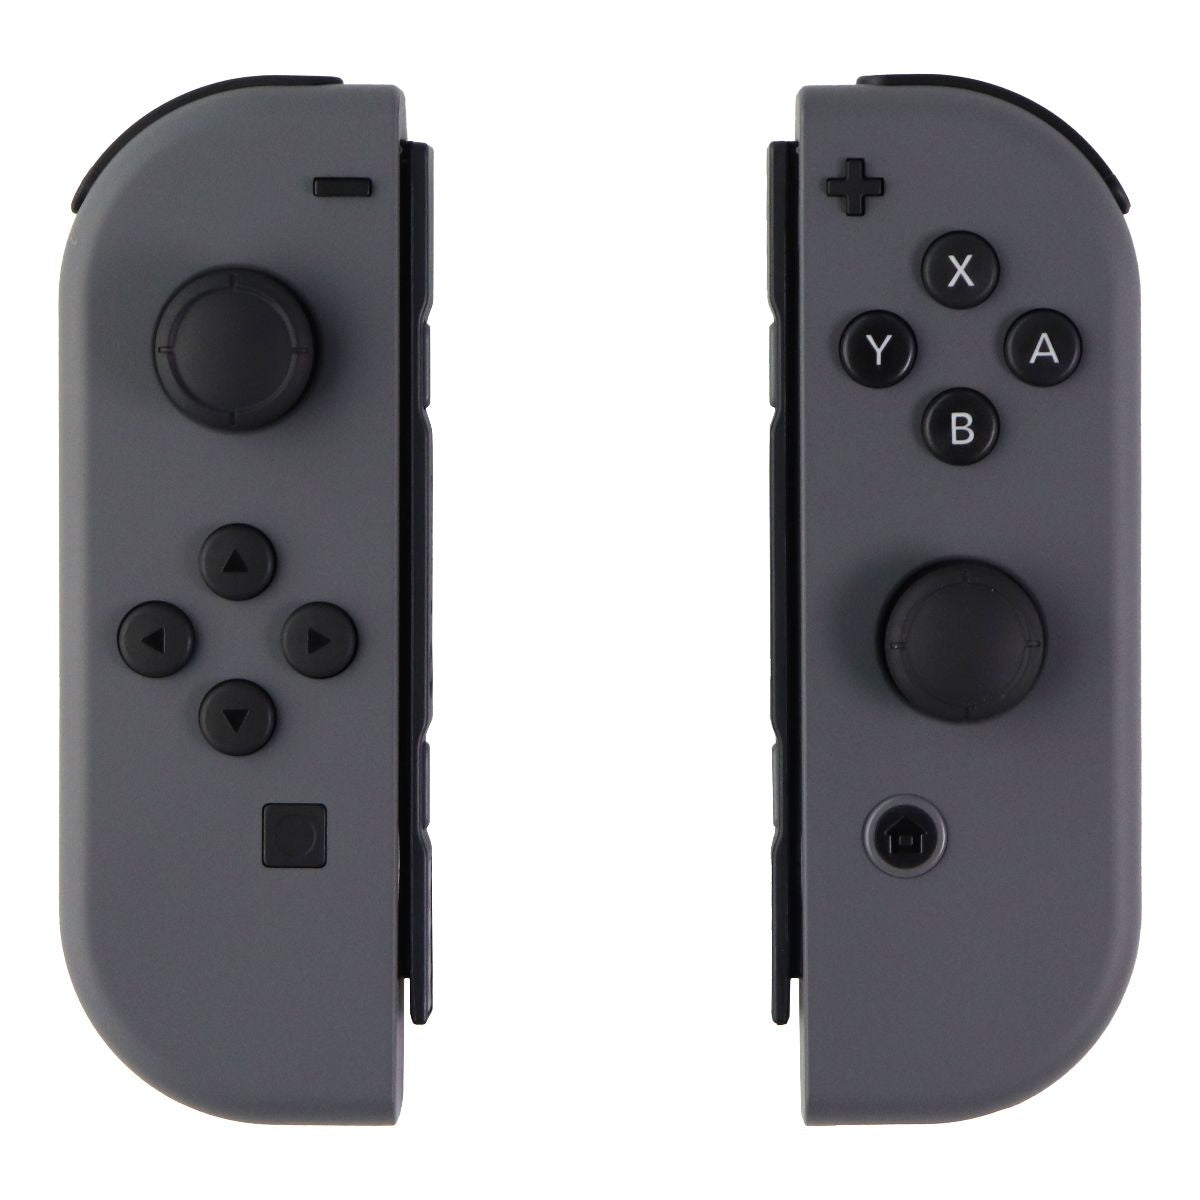 Nintendo Switch Left and Right OEM Joy-Con Controllers (L/R) with Strap - Gray